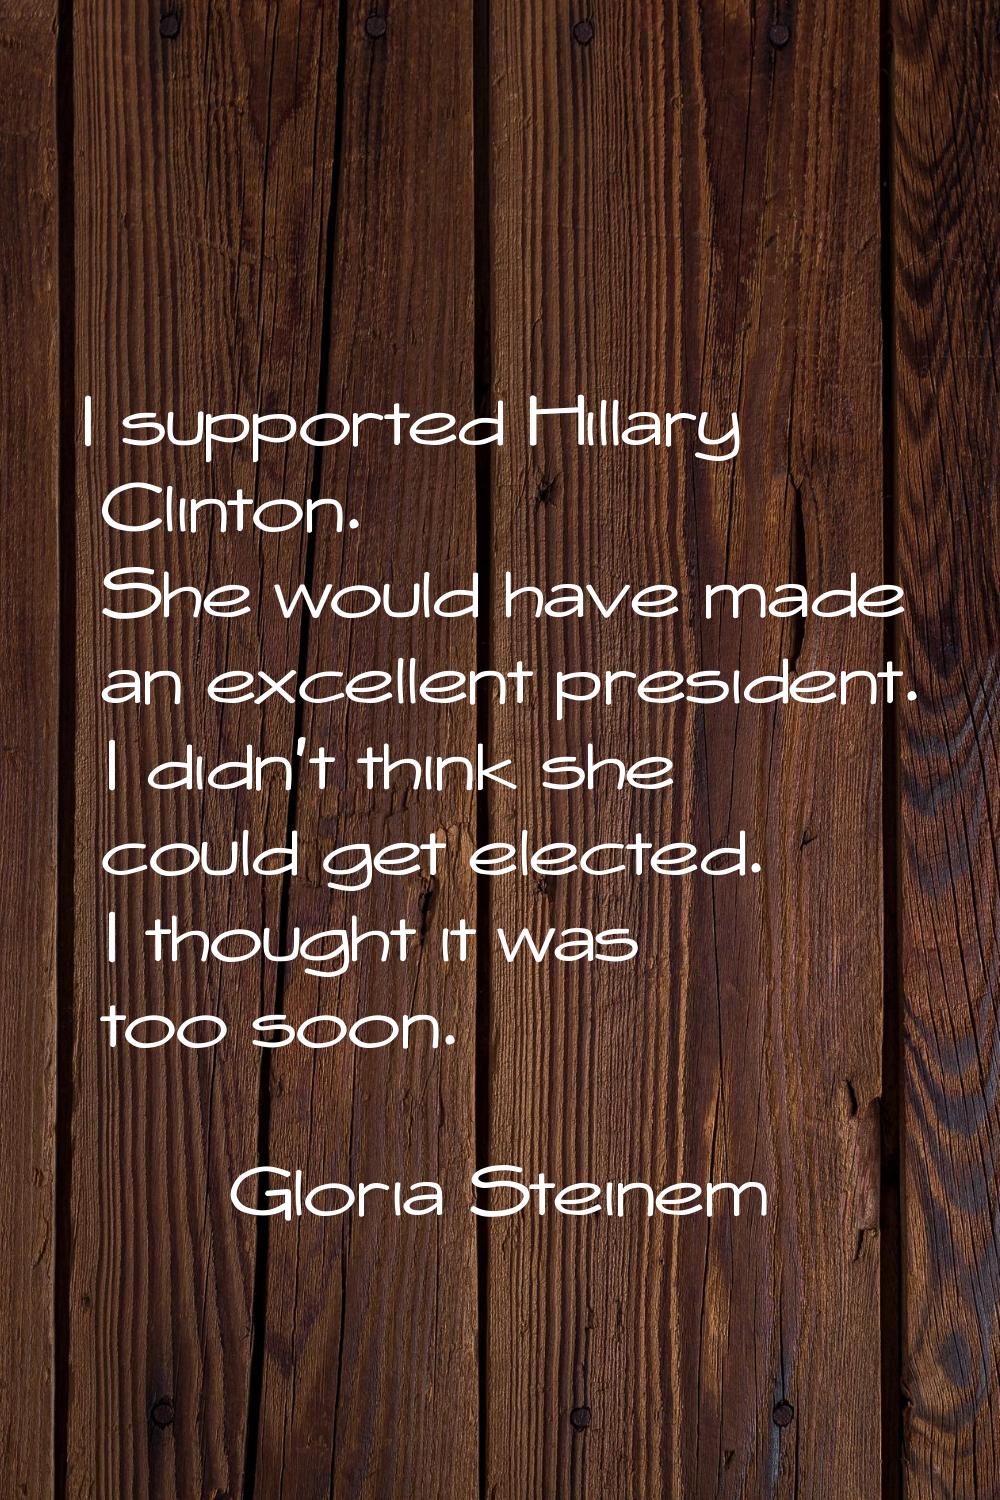 I supported Hillary Clinton. She would have made an excellent president. I didn't think she could g